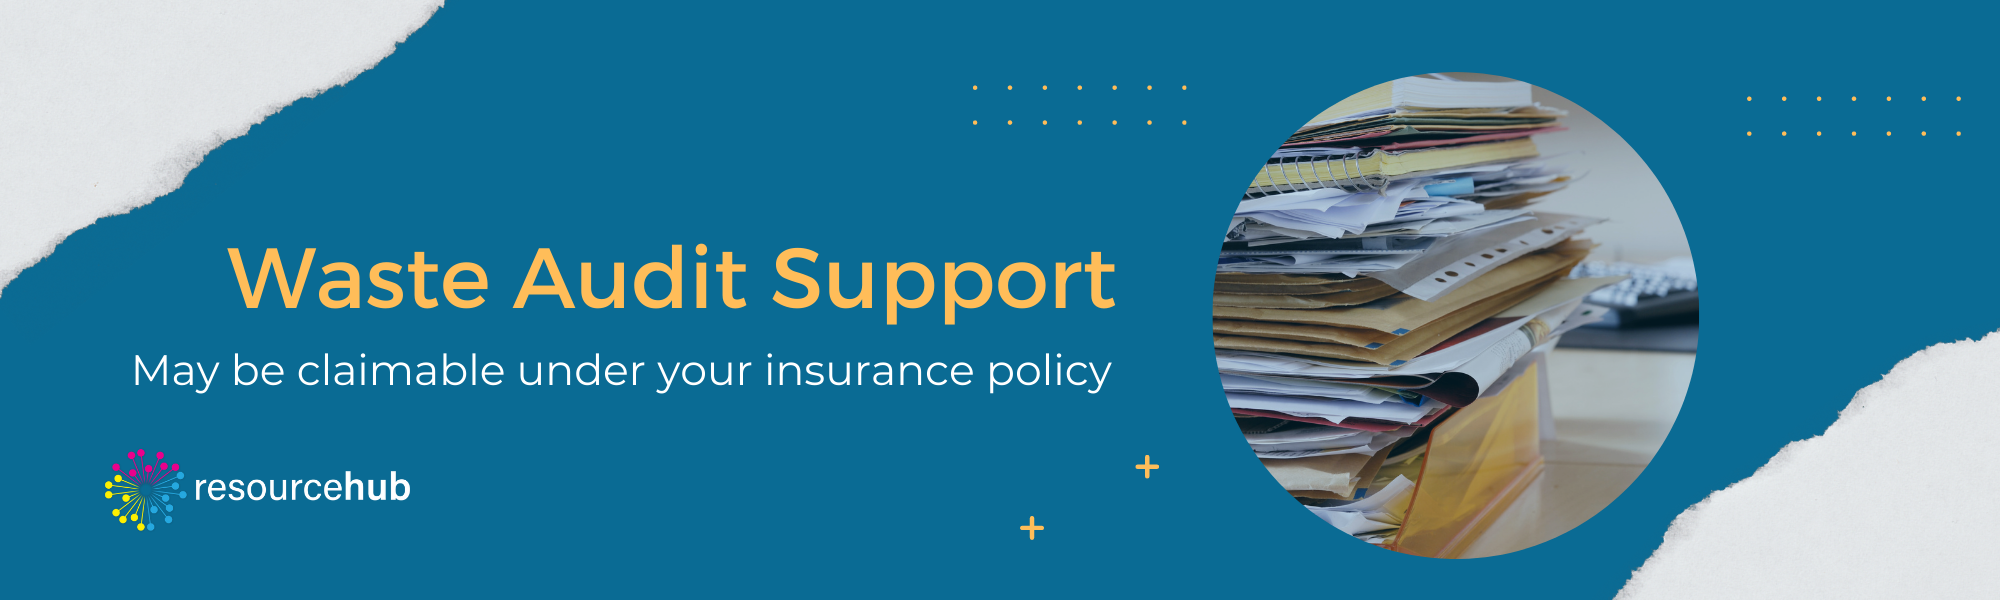 Audit Support covered under insurance policy